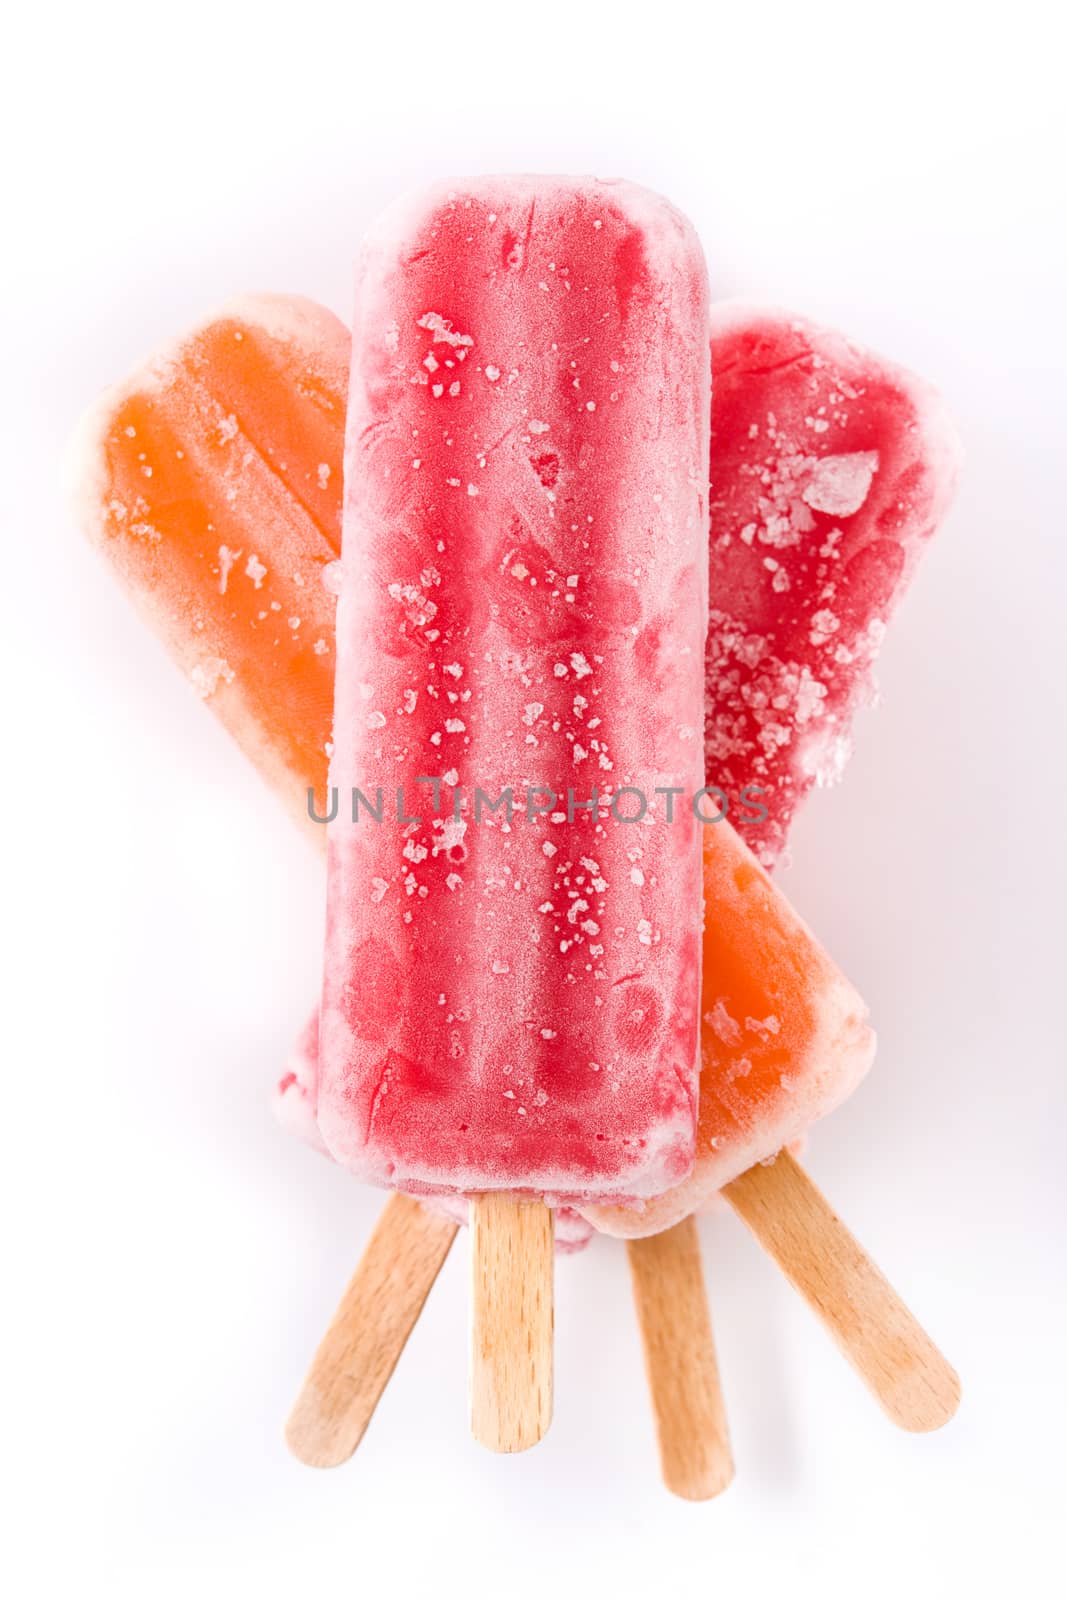 Orange and strawberry popsicles isolated on white background. by chandlervid85